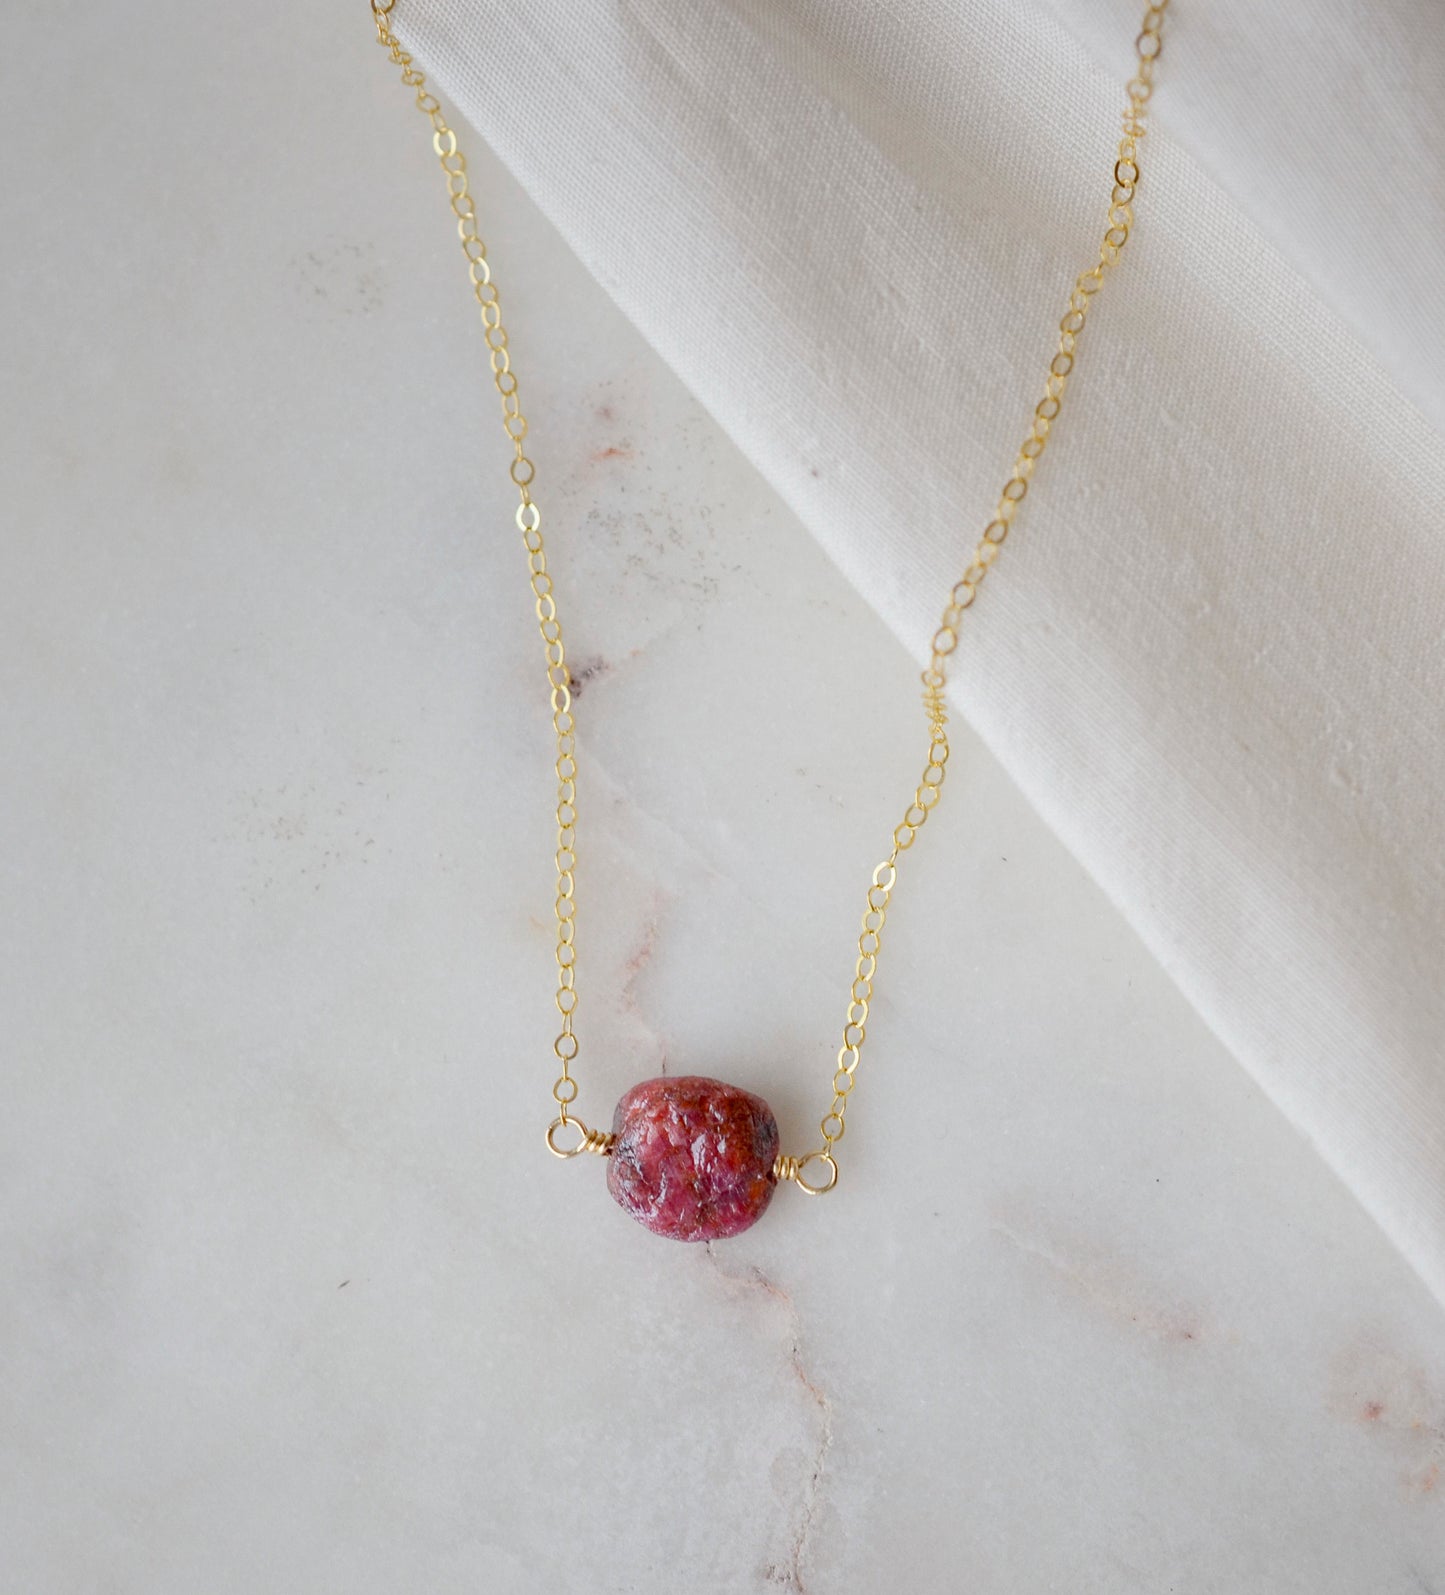 Raw Ruby Necklace in Sterling Silver or 14k Gold Filled